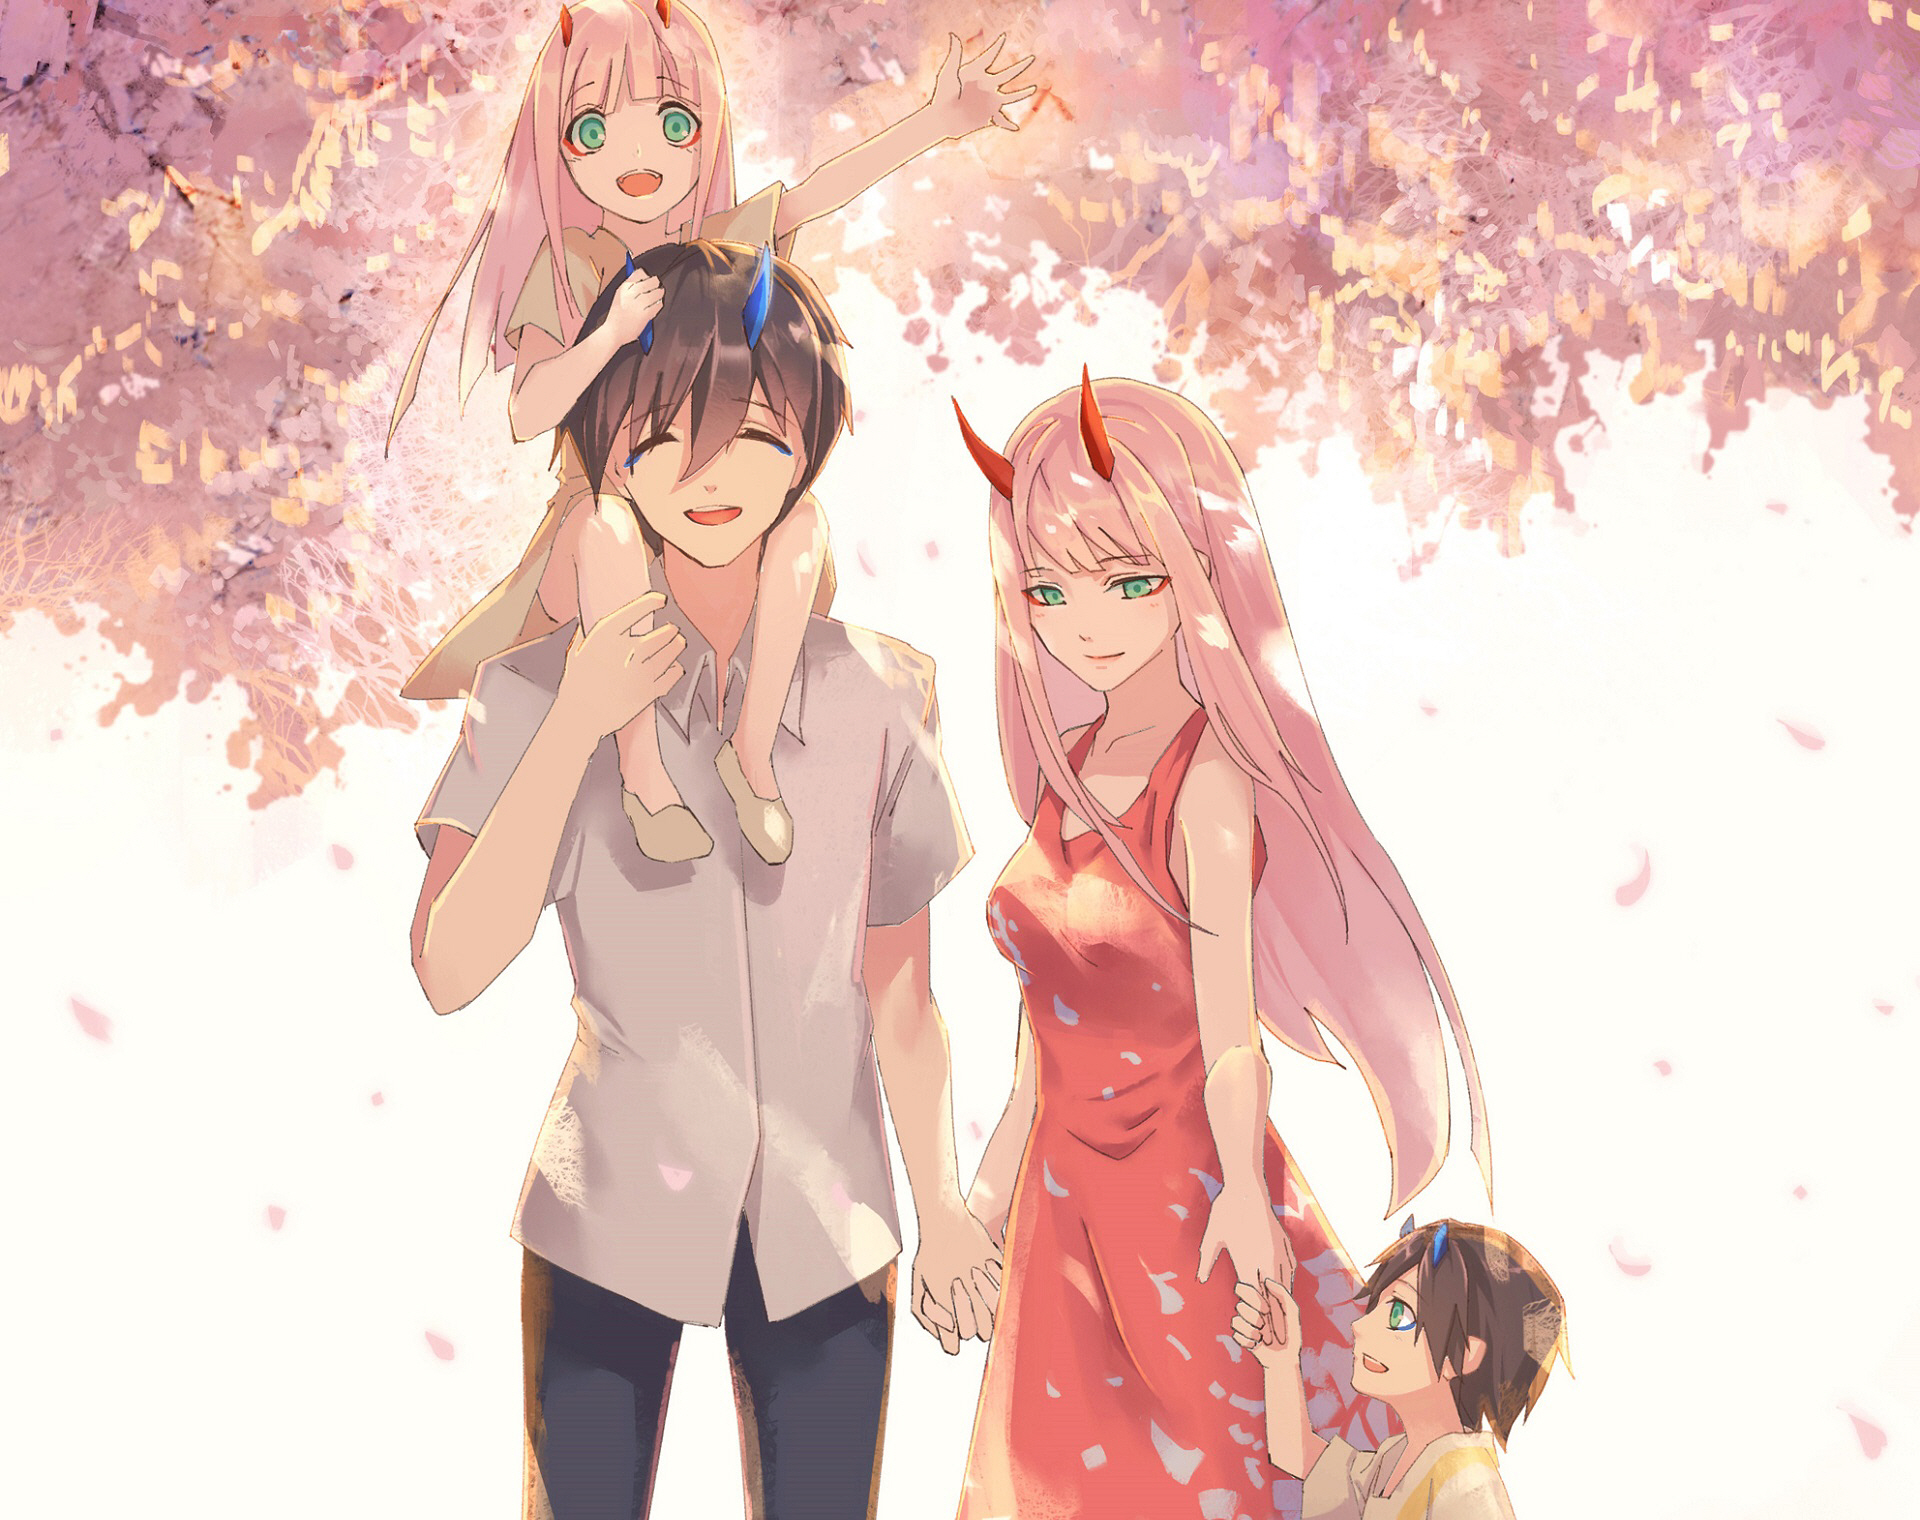 darling in the franxx, zero two (darling in the franxx), anime, hiro (darling in the franxx)